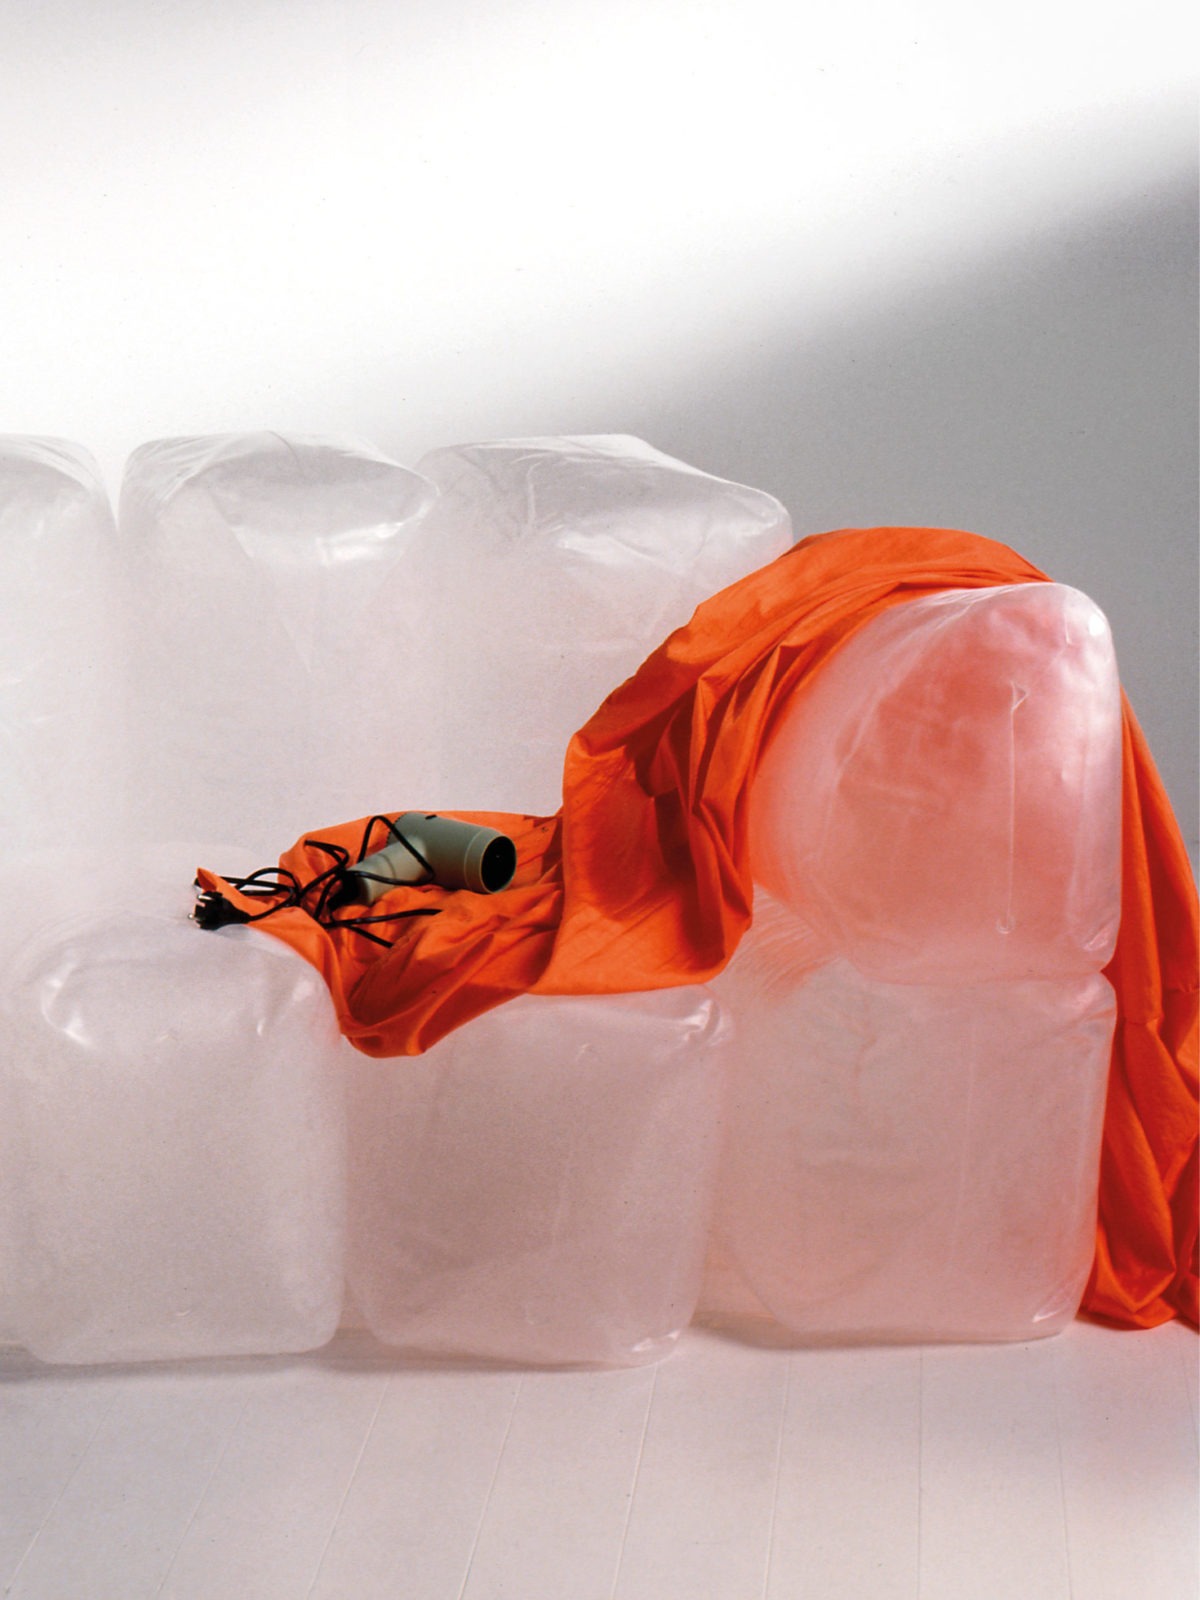 A hair-dryer sits on top of the inflatable sofa INNERLIG. An orange textile cover is draped over one armrest.